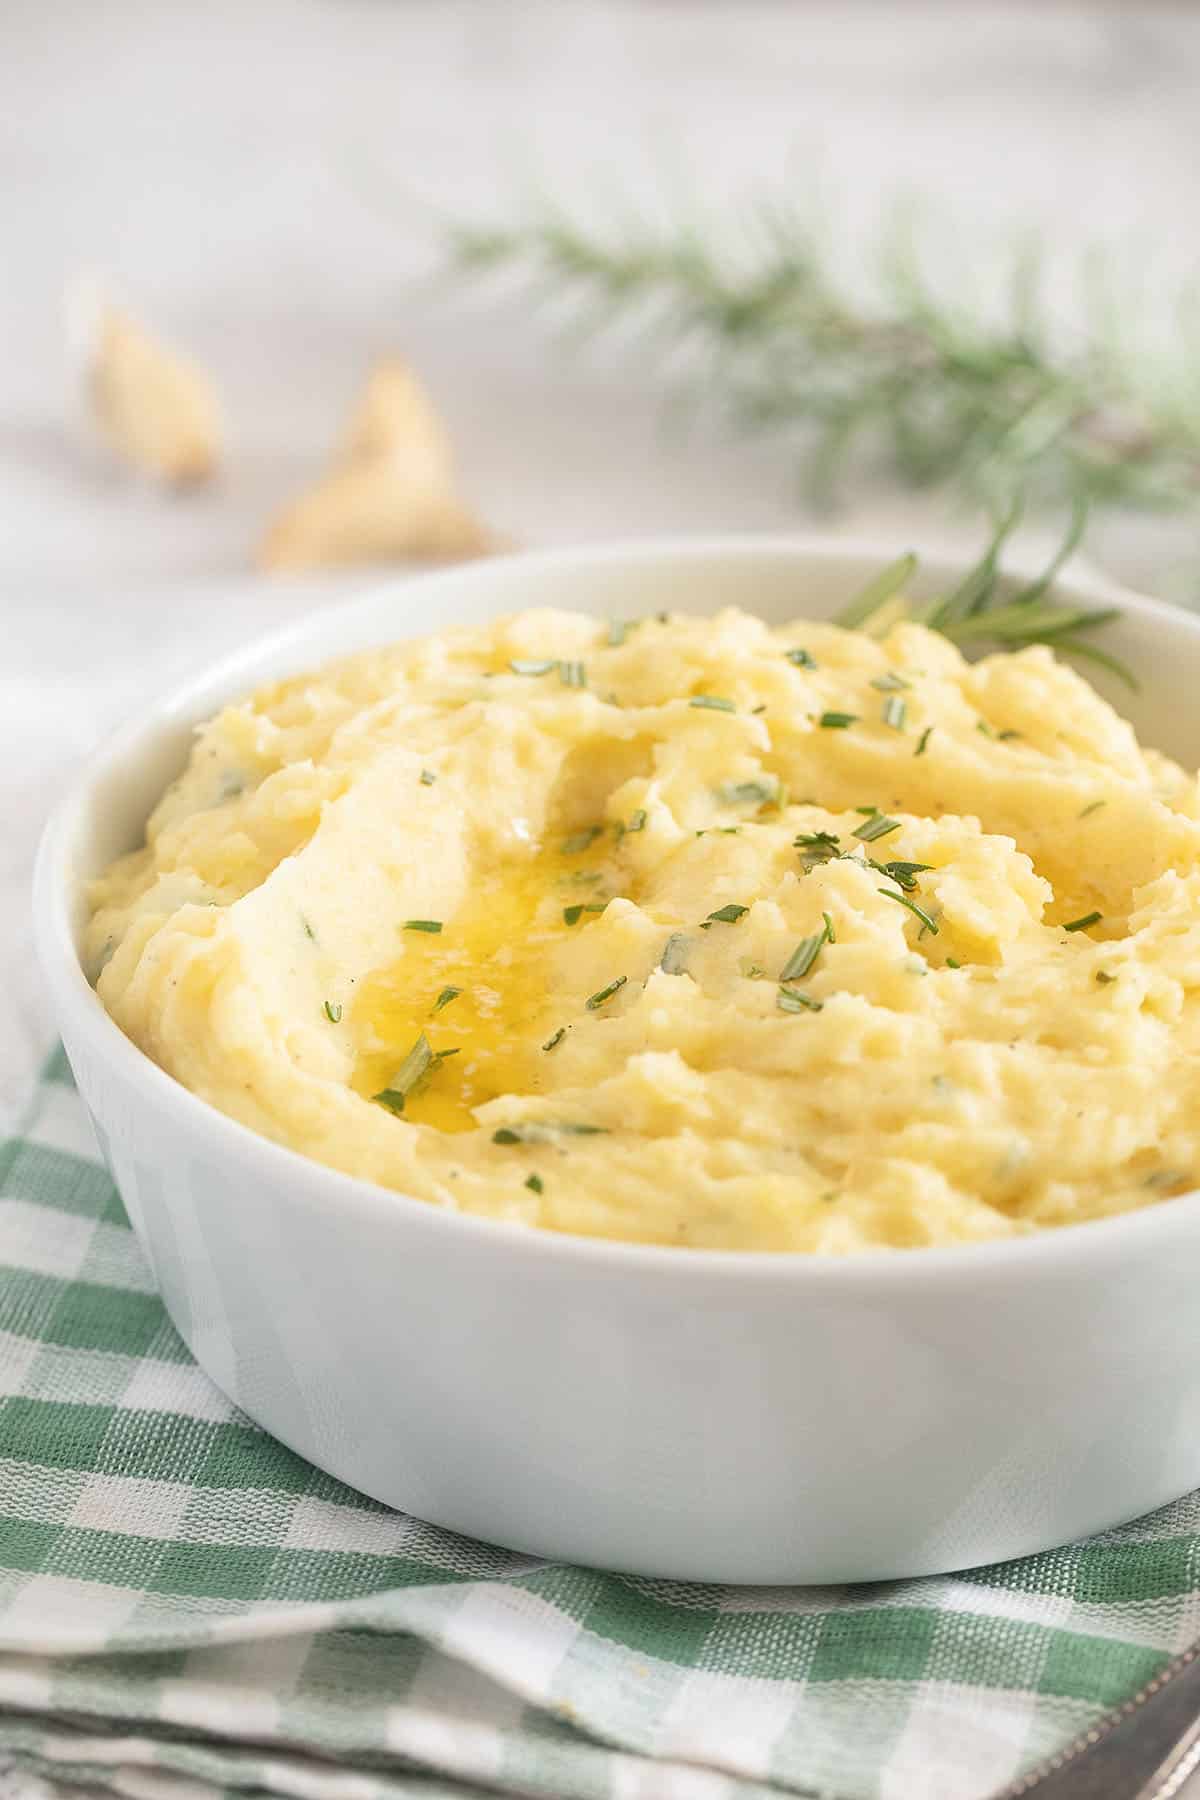 bowl of mashed potatoes with rosemary and garlic on a green and white cloth.